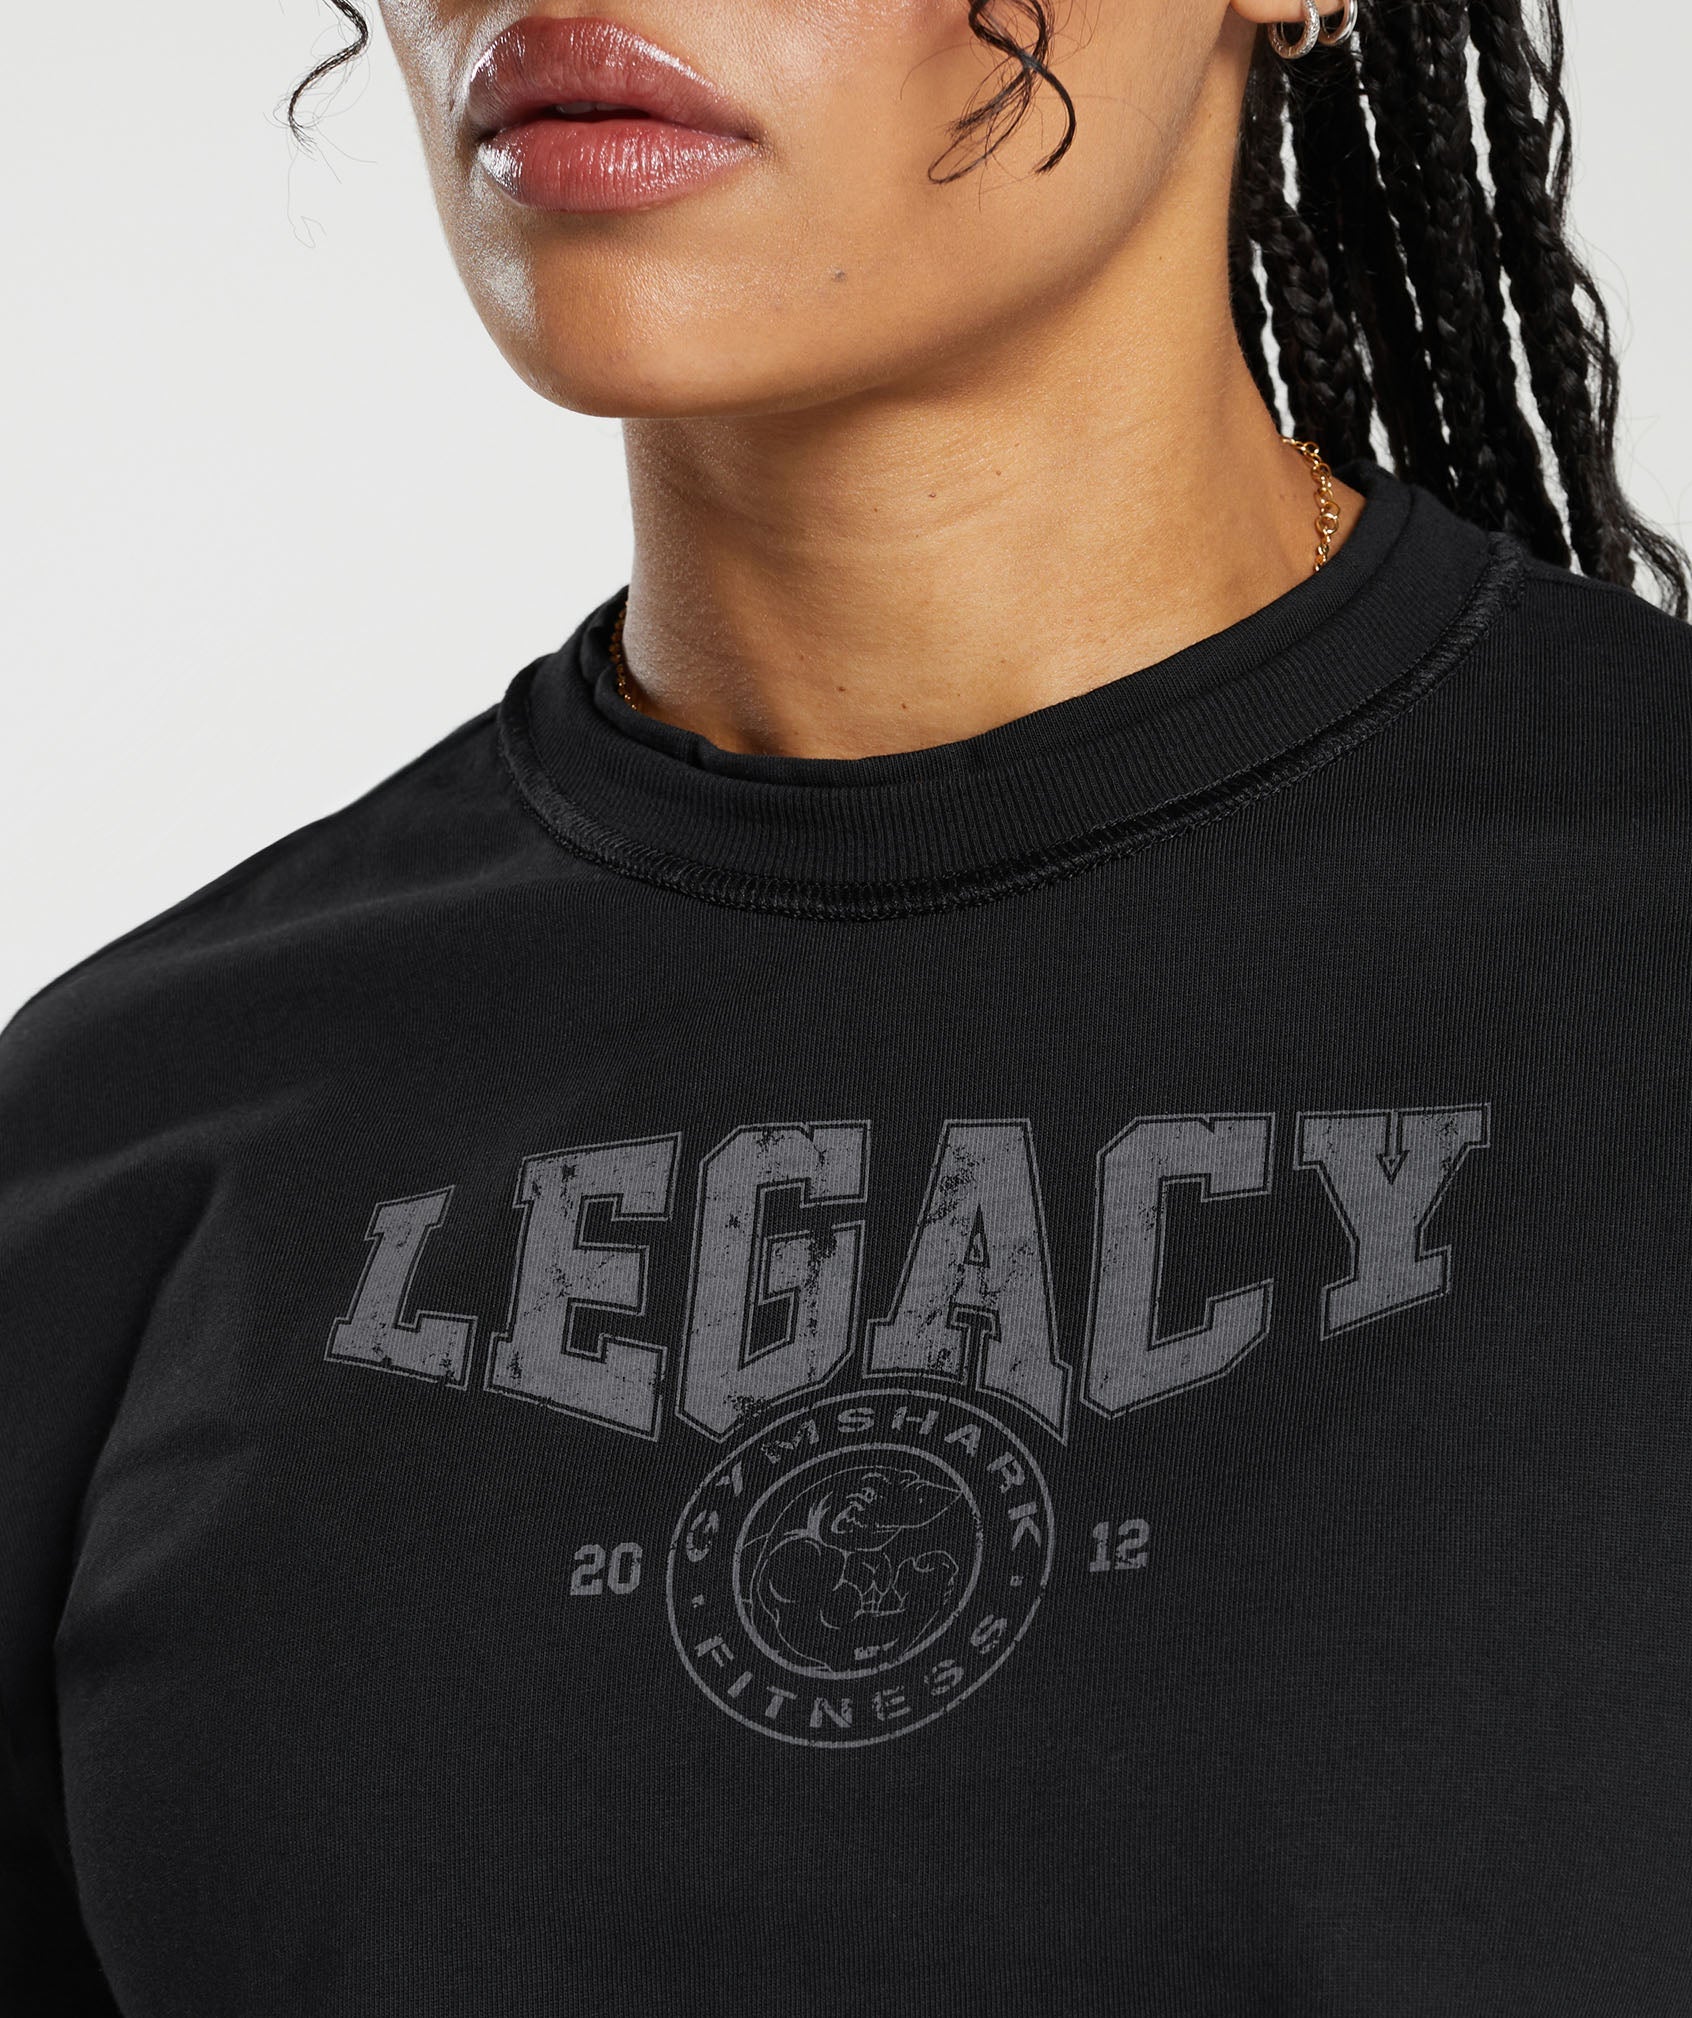 Legacy Graphic Crop Top in Black - view 5